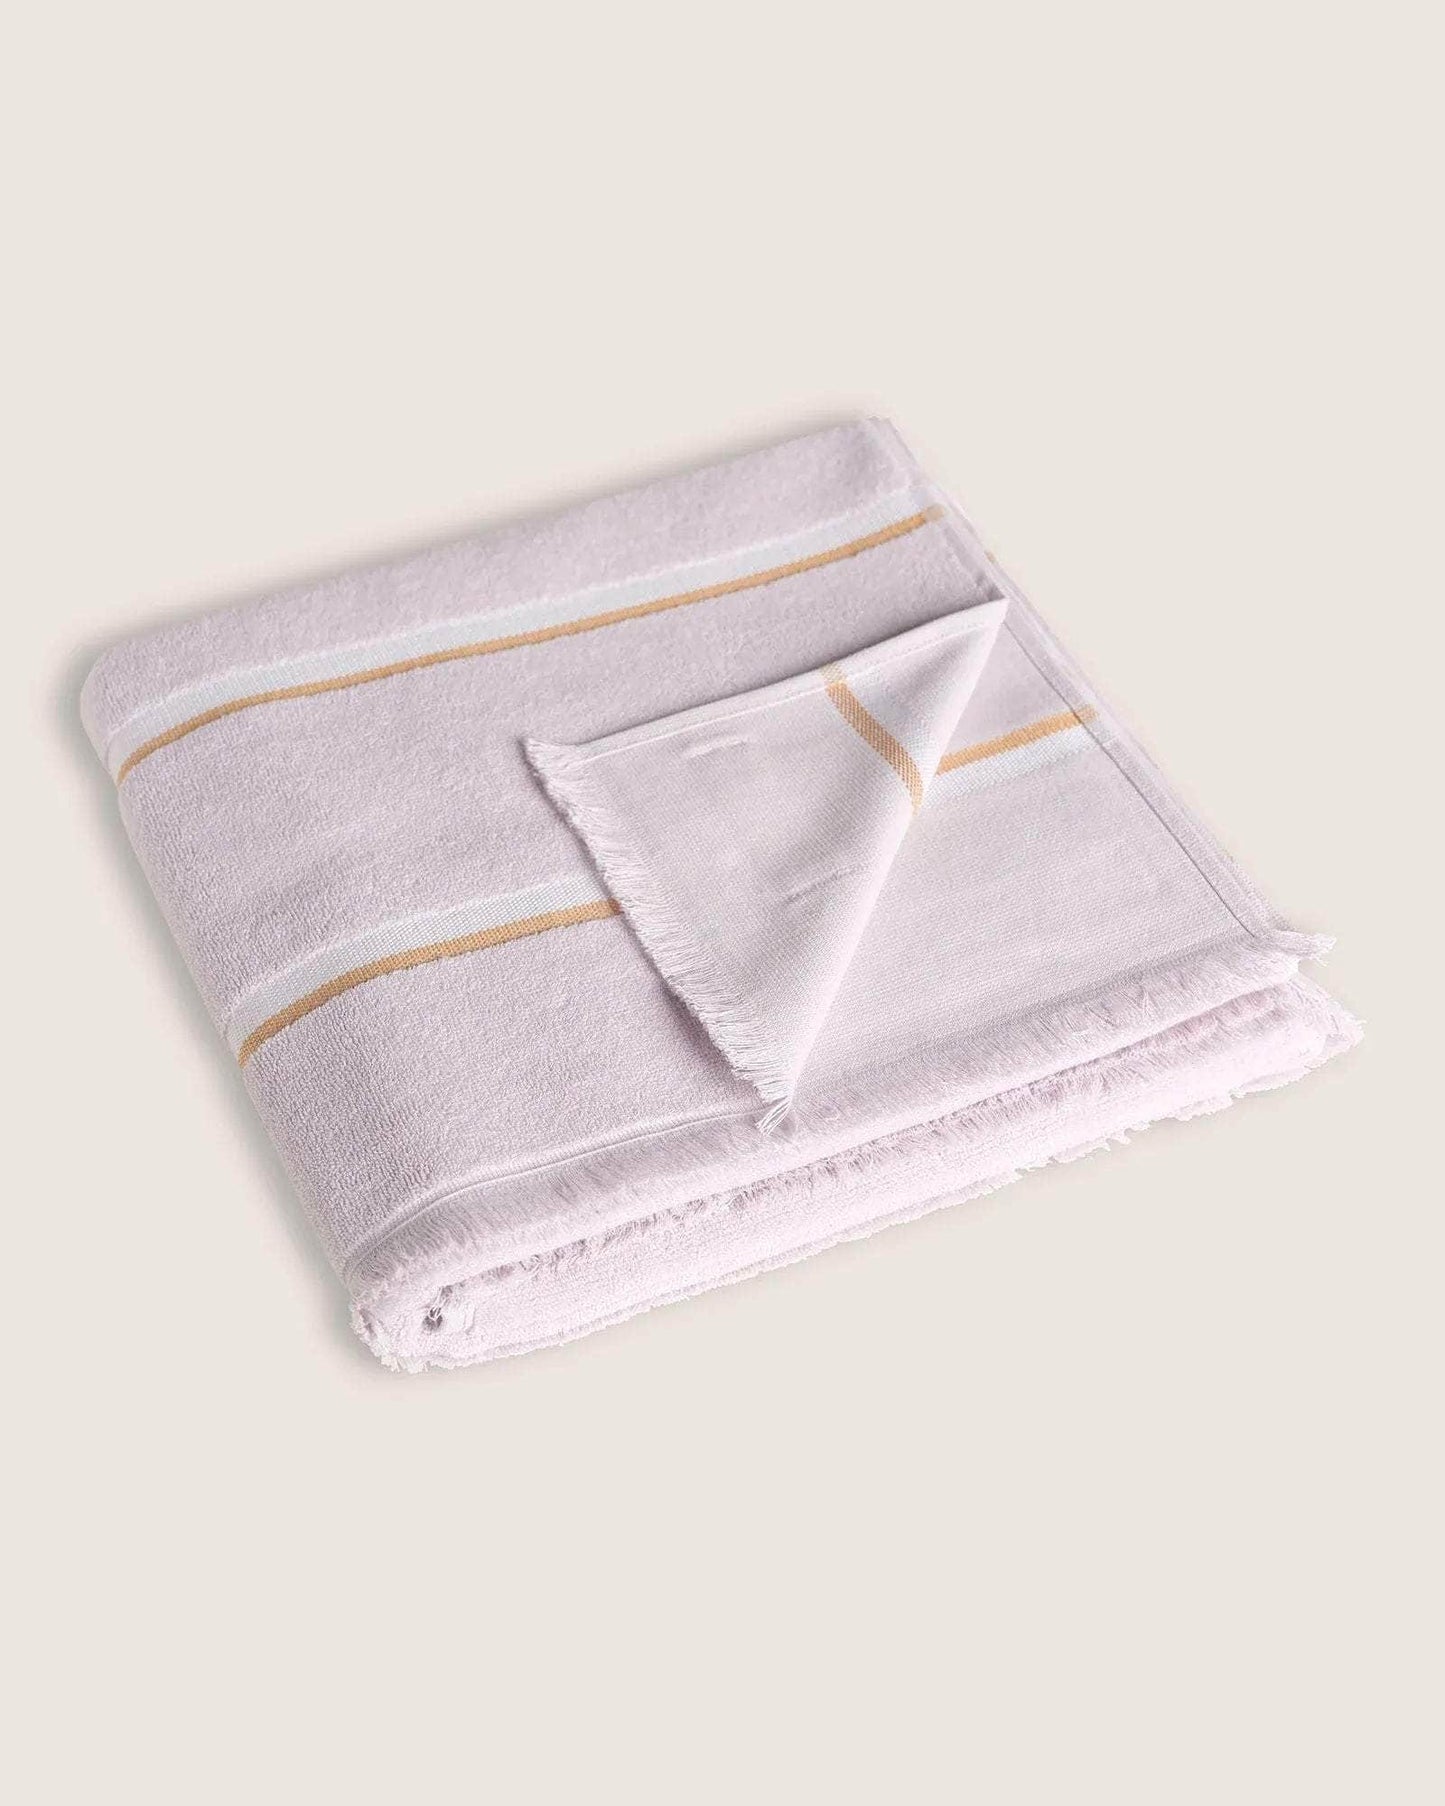 Købn Lilac towel *ON SALE FOR A LIMITED TIME*